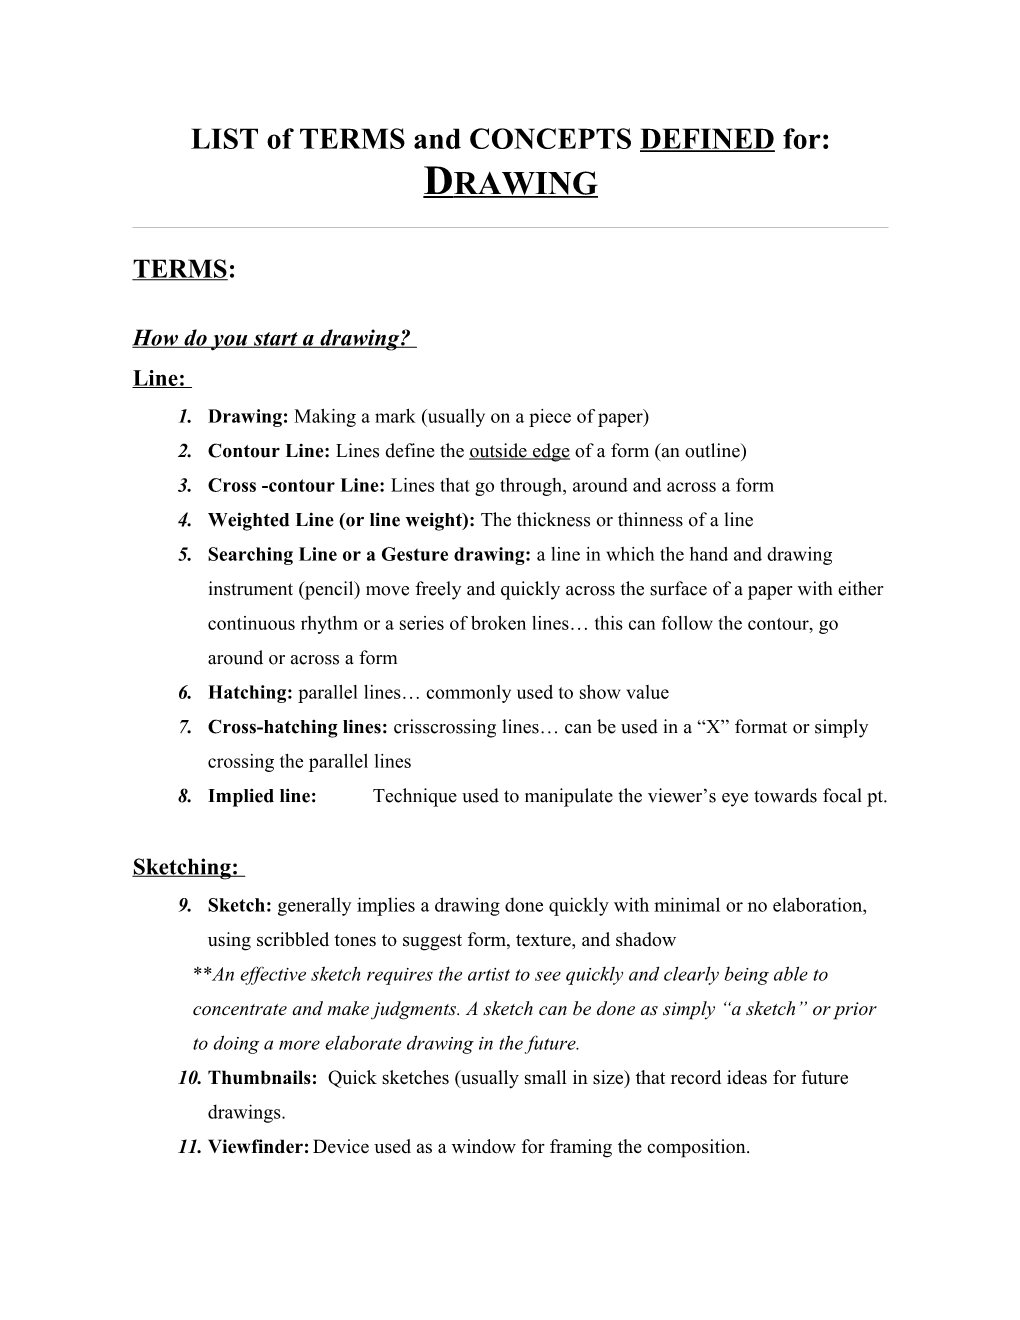 Drawing Terms & Concepts Defined